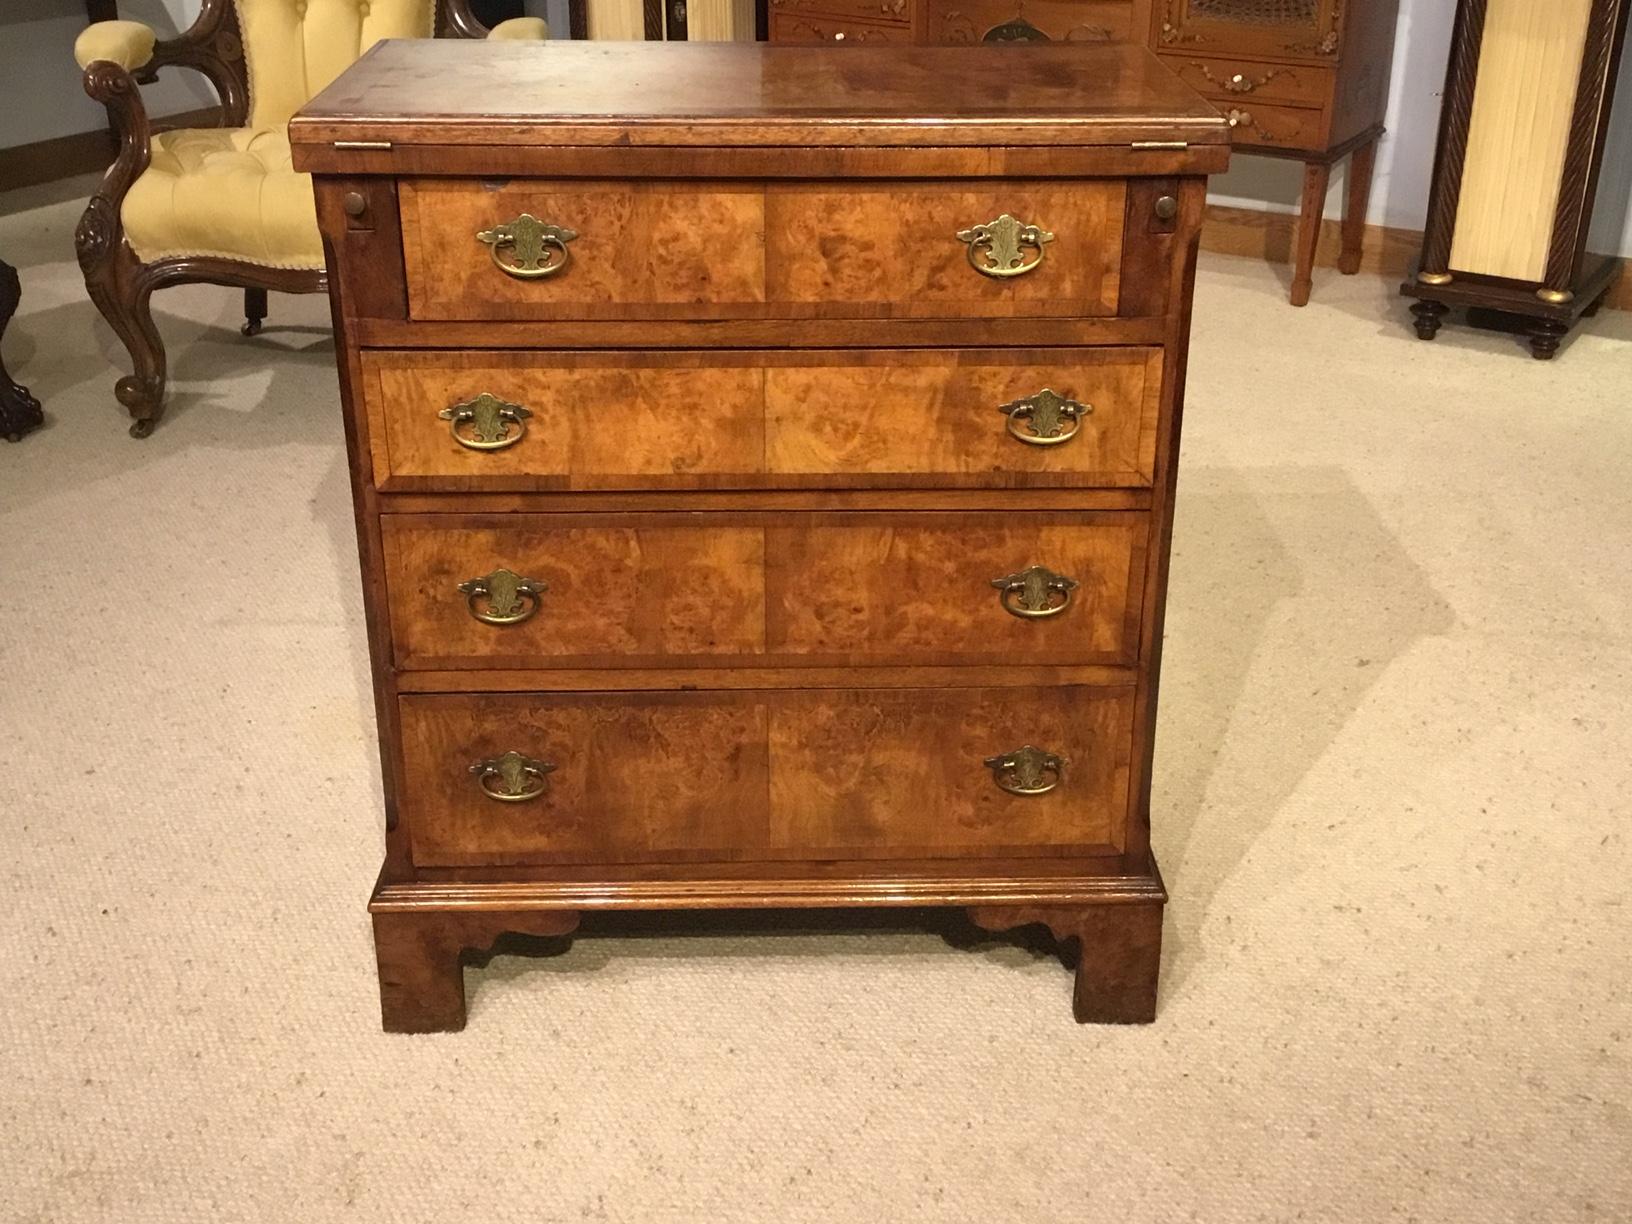 A burr walnut George I Style bachelors chest. The rectangular hinged top veneered in beautifully figured burr walnut and banded in walnut, opening to reveal a burr walnut surface which is supported on two lopers. Having an arrangement of four